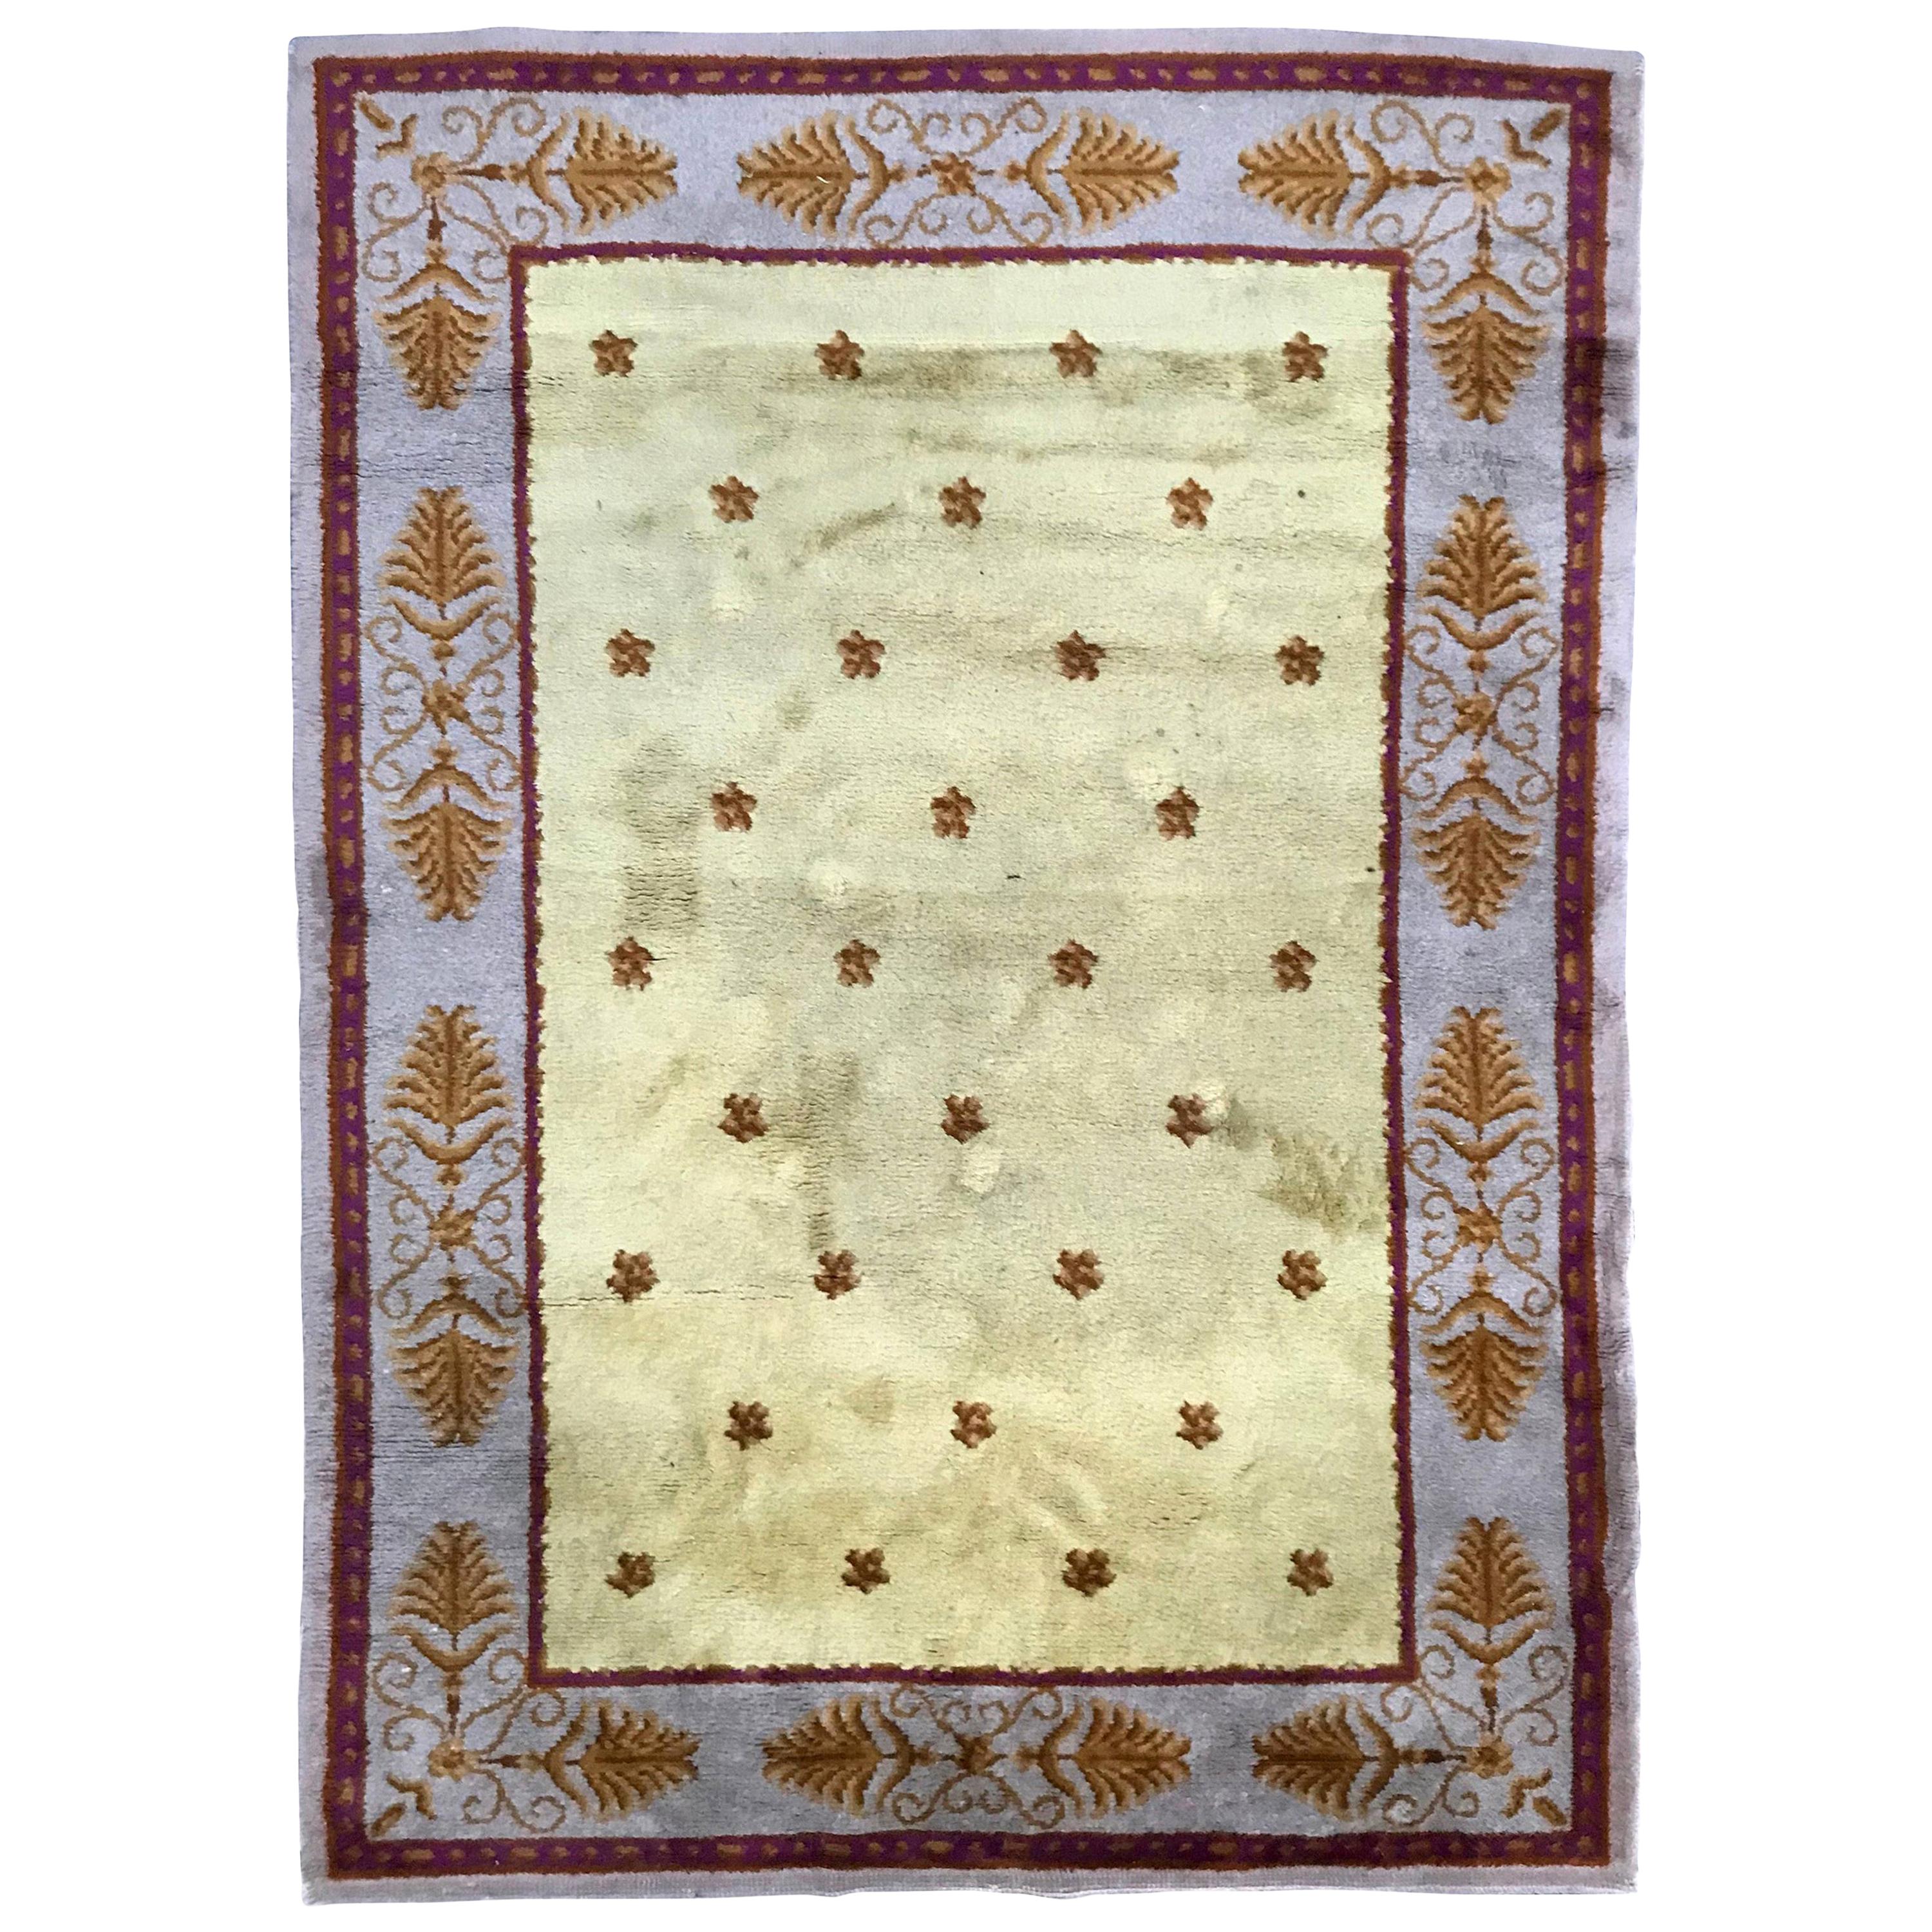 Bobyrug's Nice Antique French Savonnerie Rug